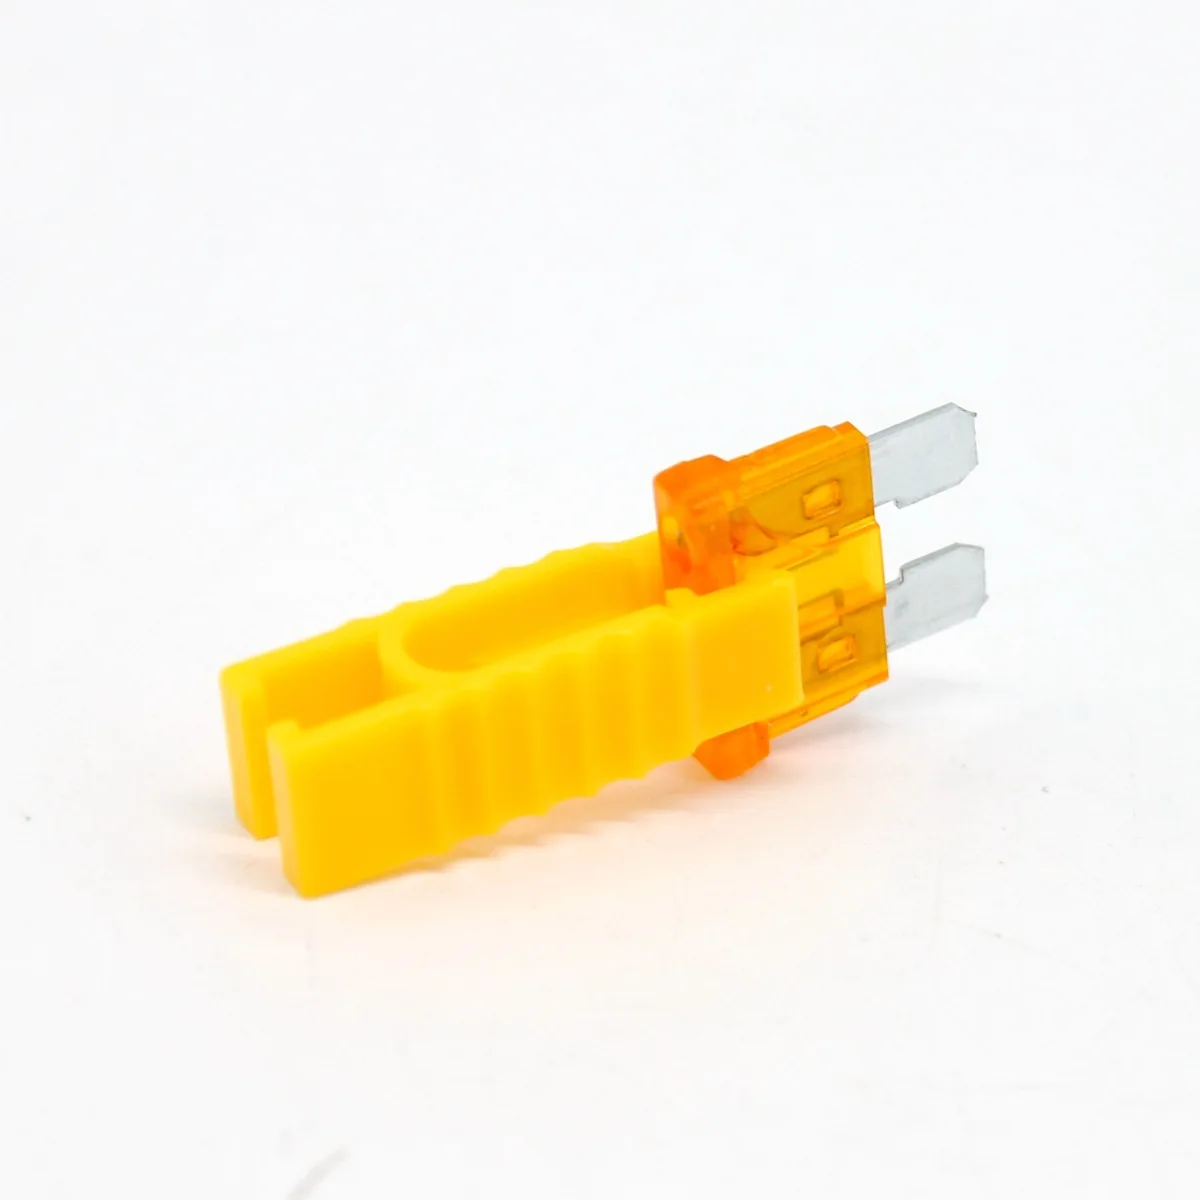 3 Pieces Blades Glass Fuse the Puller Insert Tool Standard Car Fuse Box Supplies